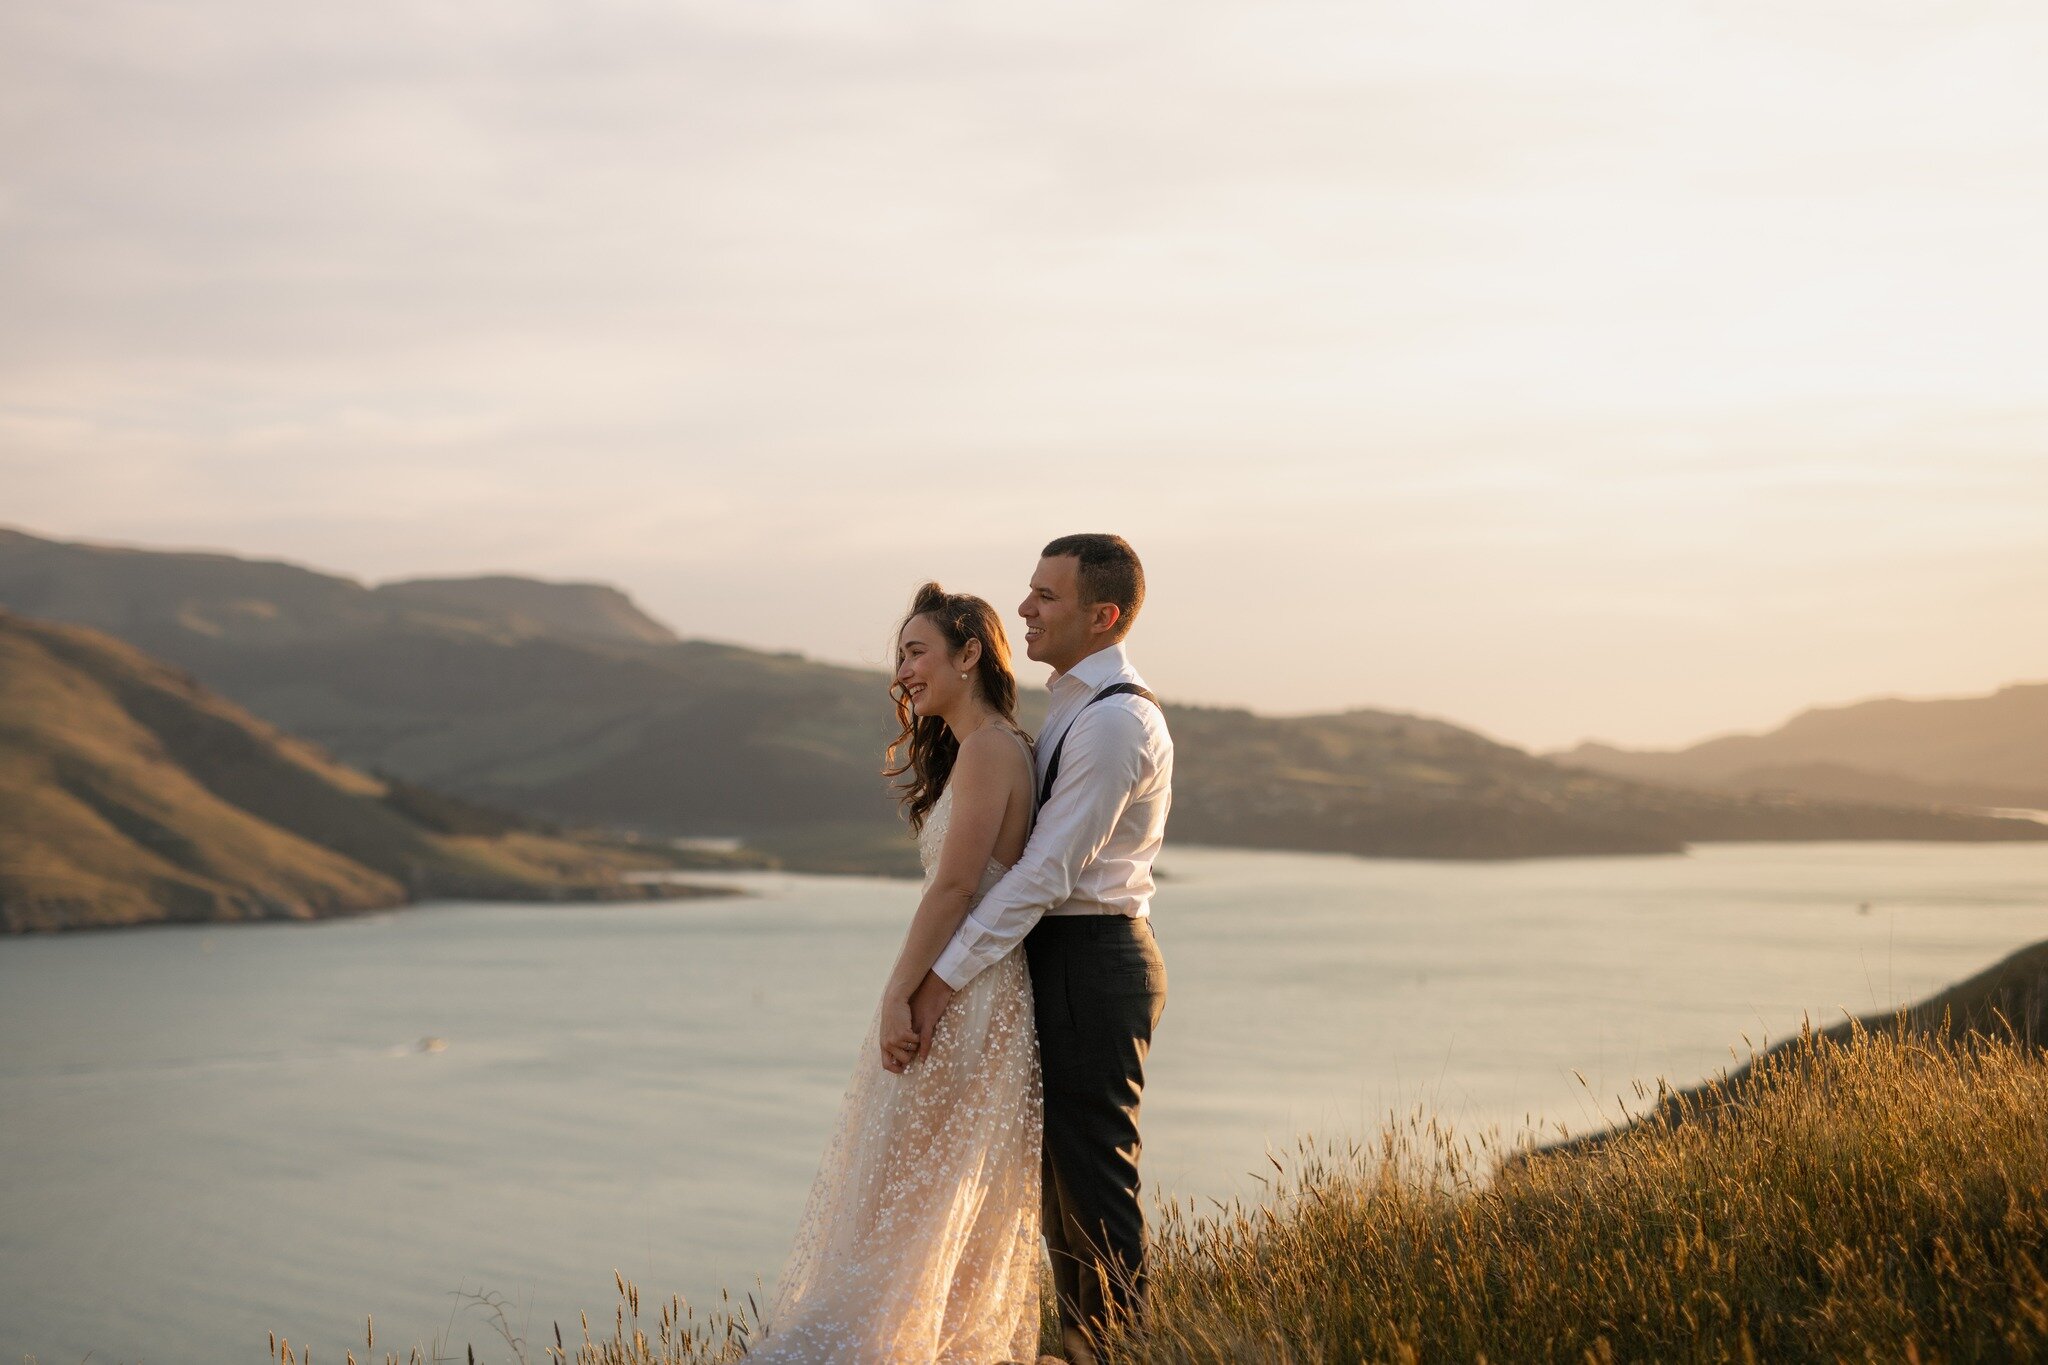 A perfect evening spent with D &amp; G ⭐ the weather did not disappoint.
.
.
.
 #newzealandweddingphotographer #newzealandweddings #weddingideas #wedding #canterburybridenz #weddingnzphotographer #southislandweddings #newlyengaged #nzwedding #Married